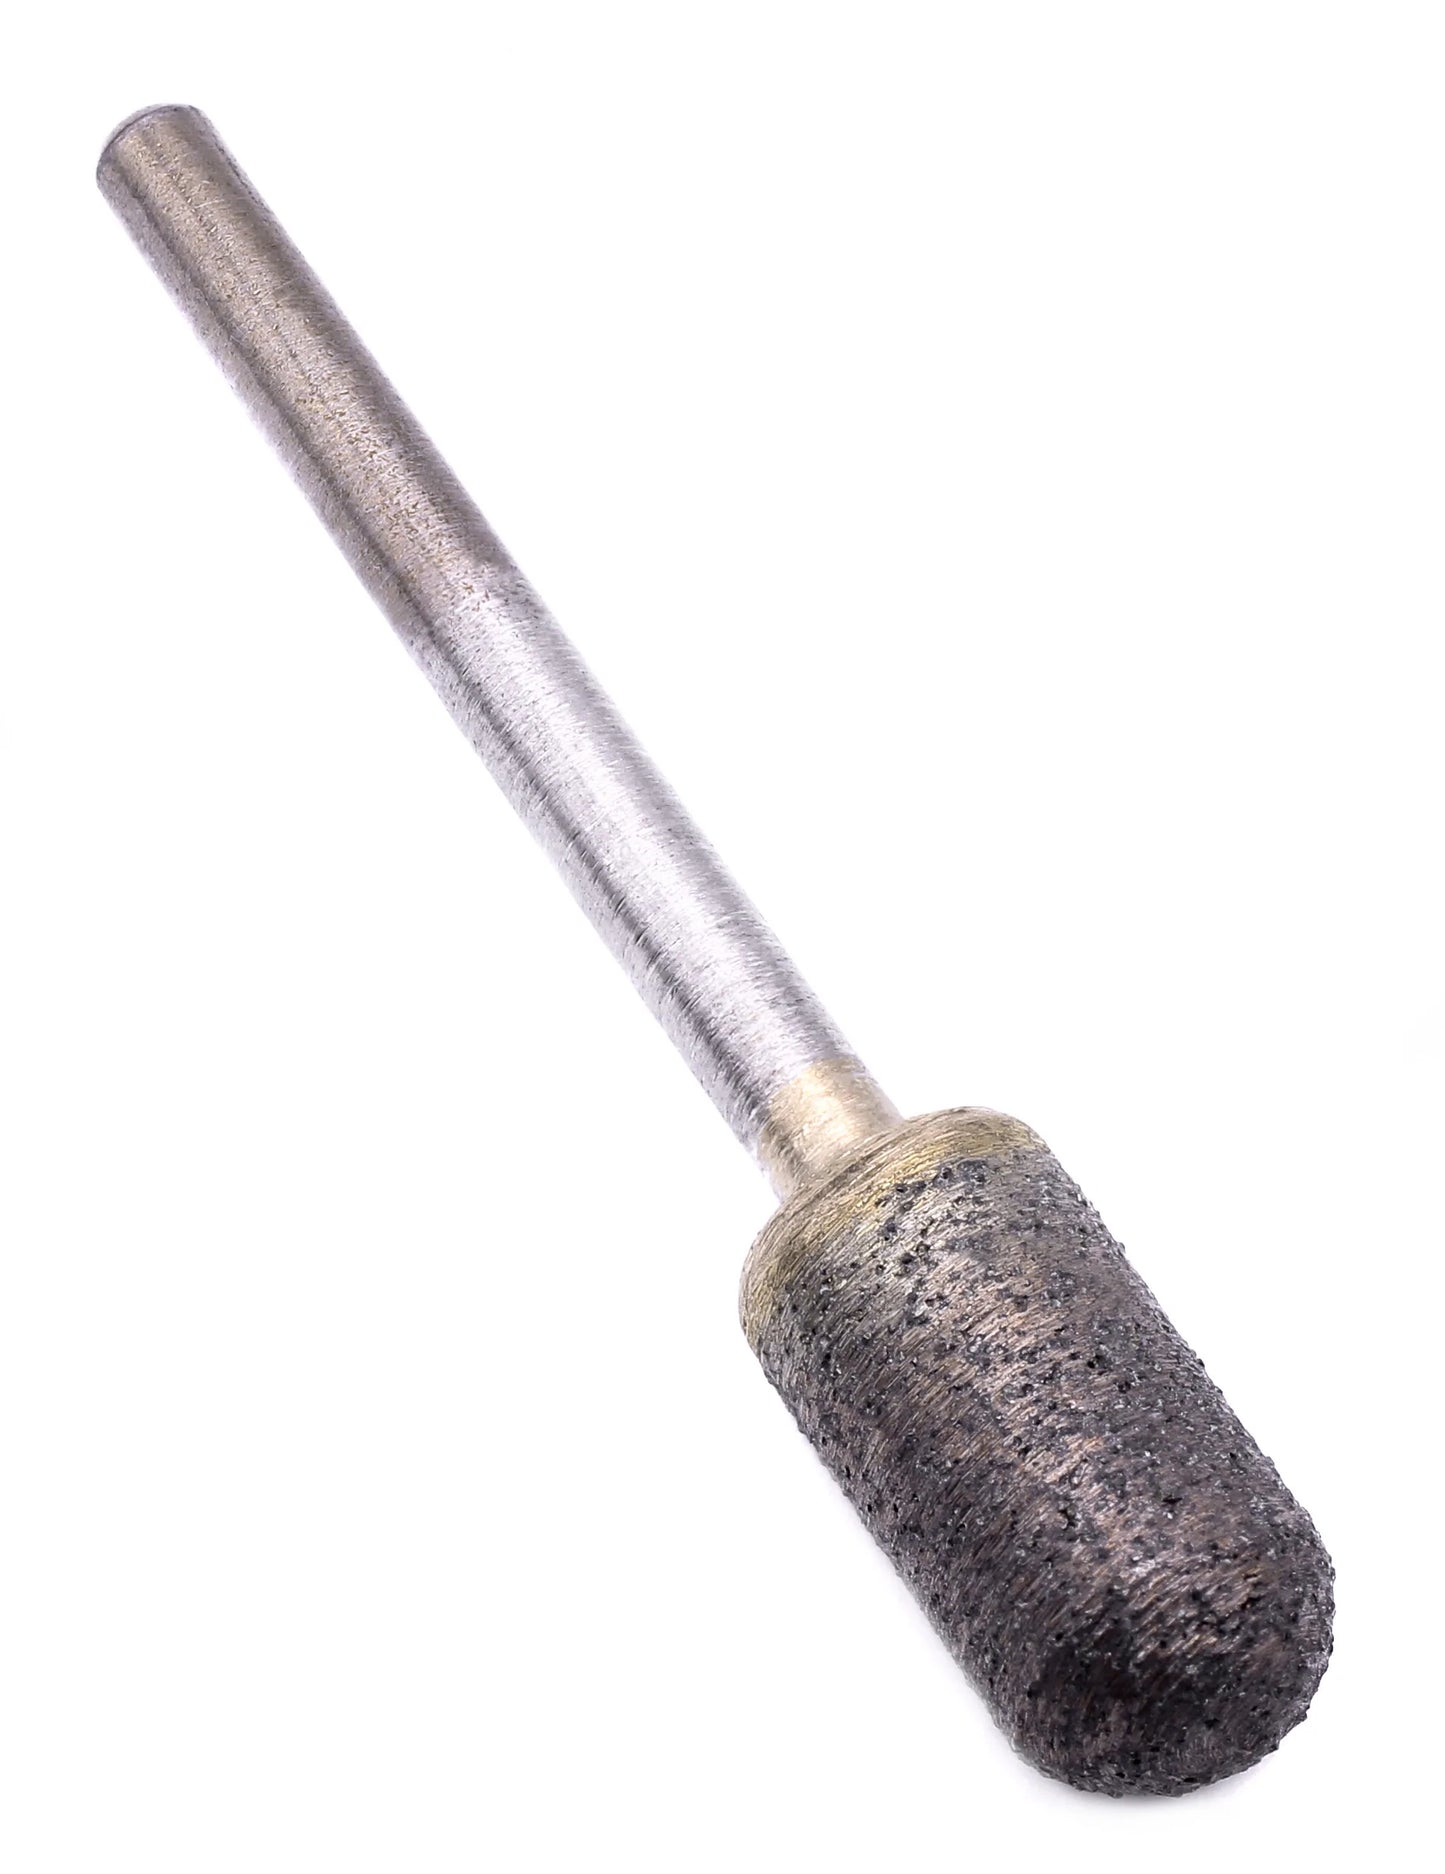 Dome Rotary Tool 7mm Shaft 80 Grit